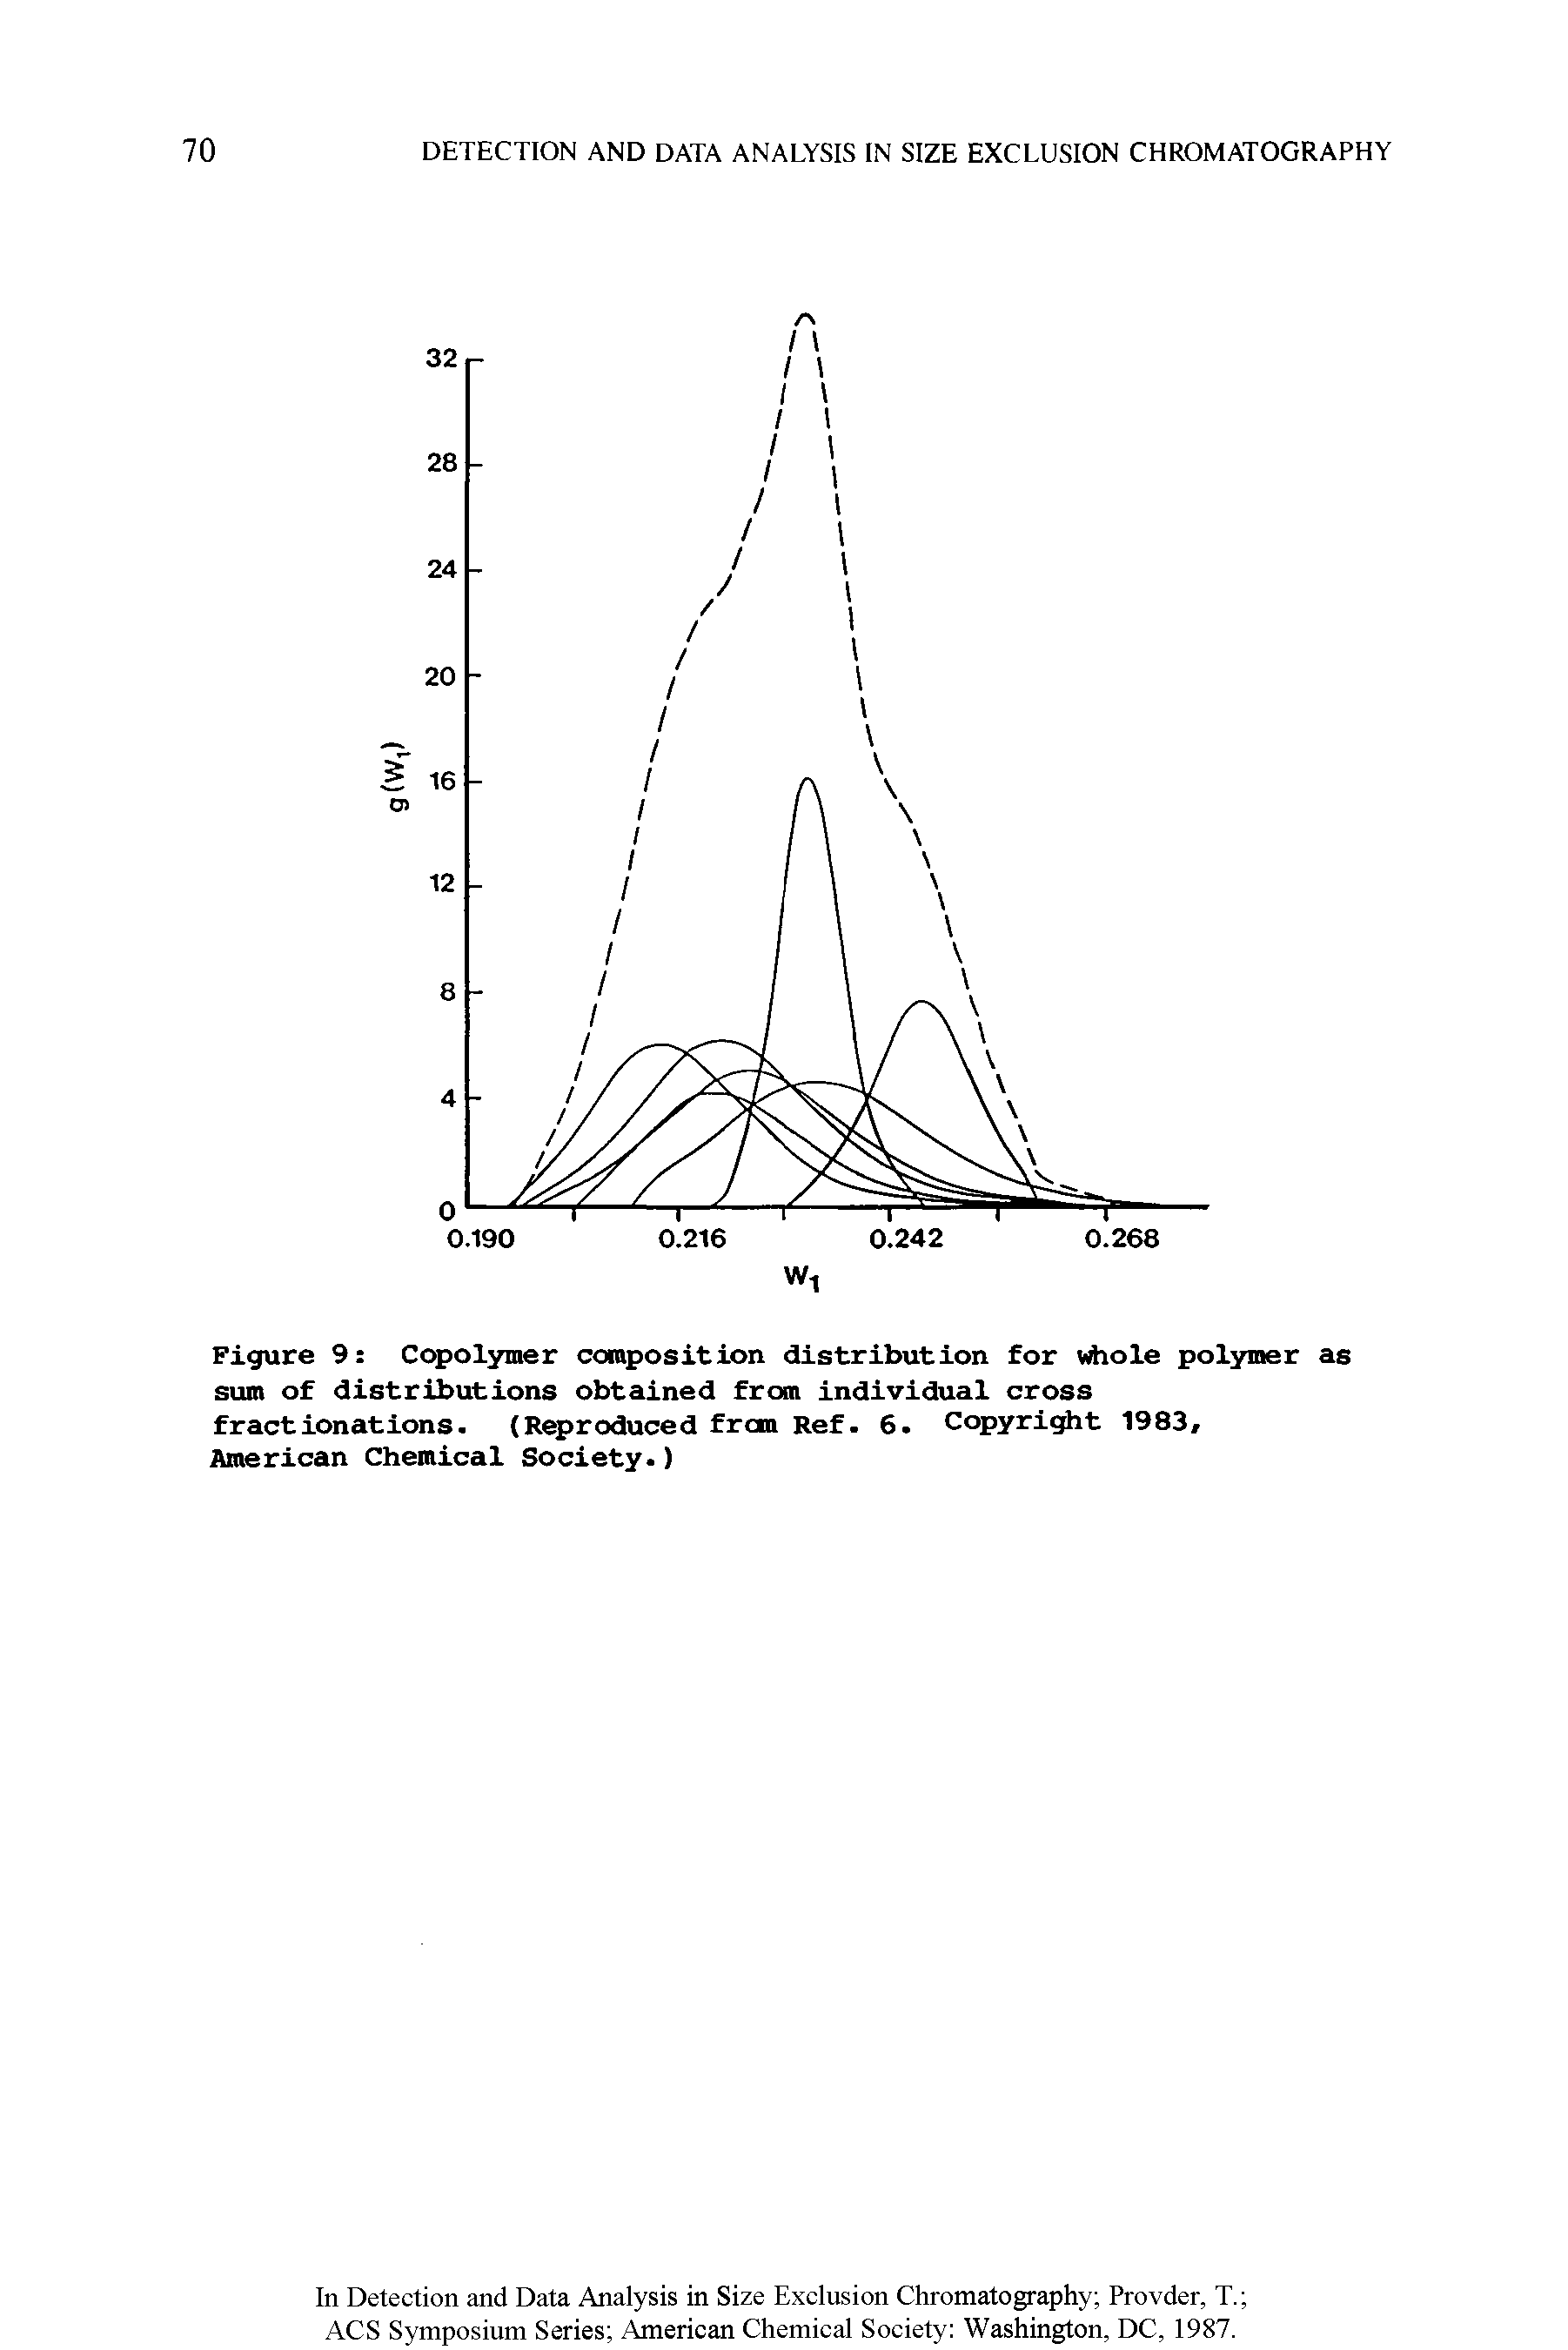 Figure 9 Copolymer composition distribution for Whole polymer as sum of distributions obtained from individual cross fractionations. (Reproduced from Ref. 6. Copyright 1983,...